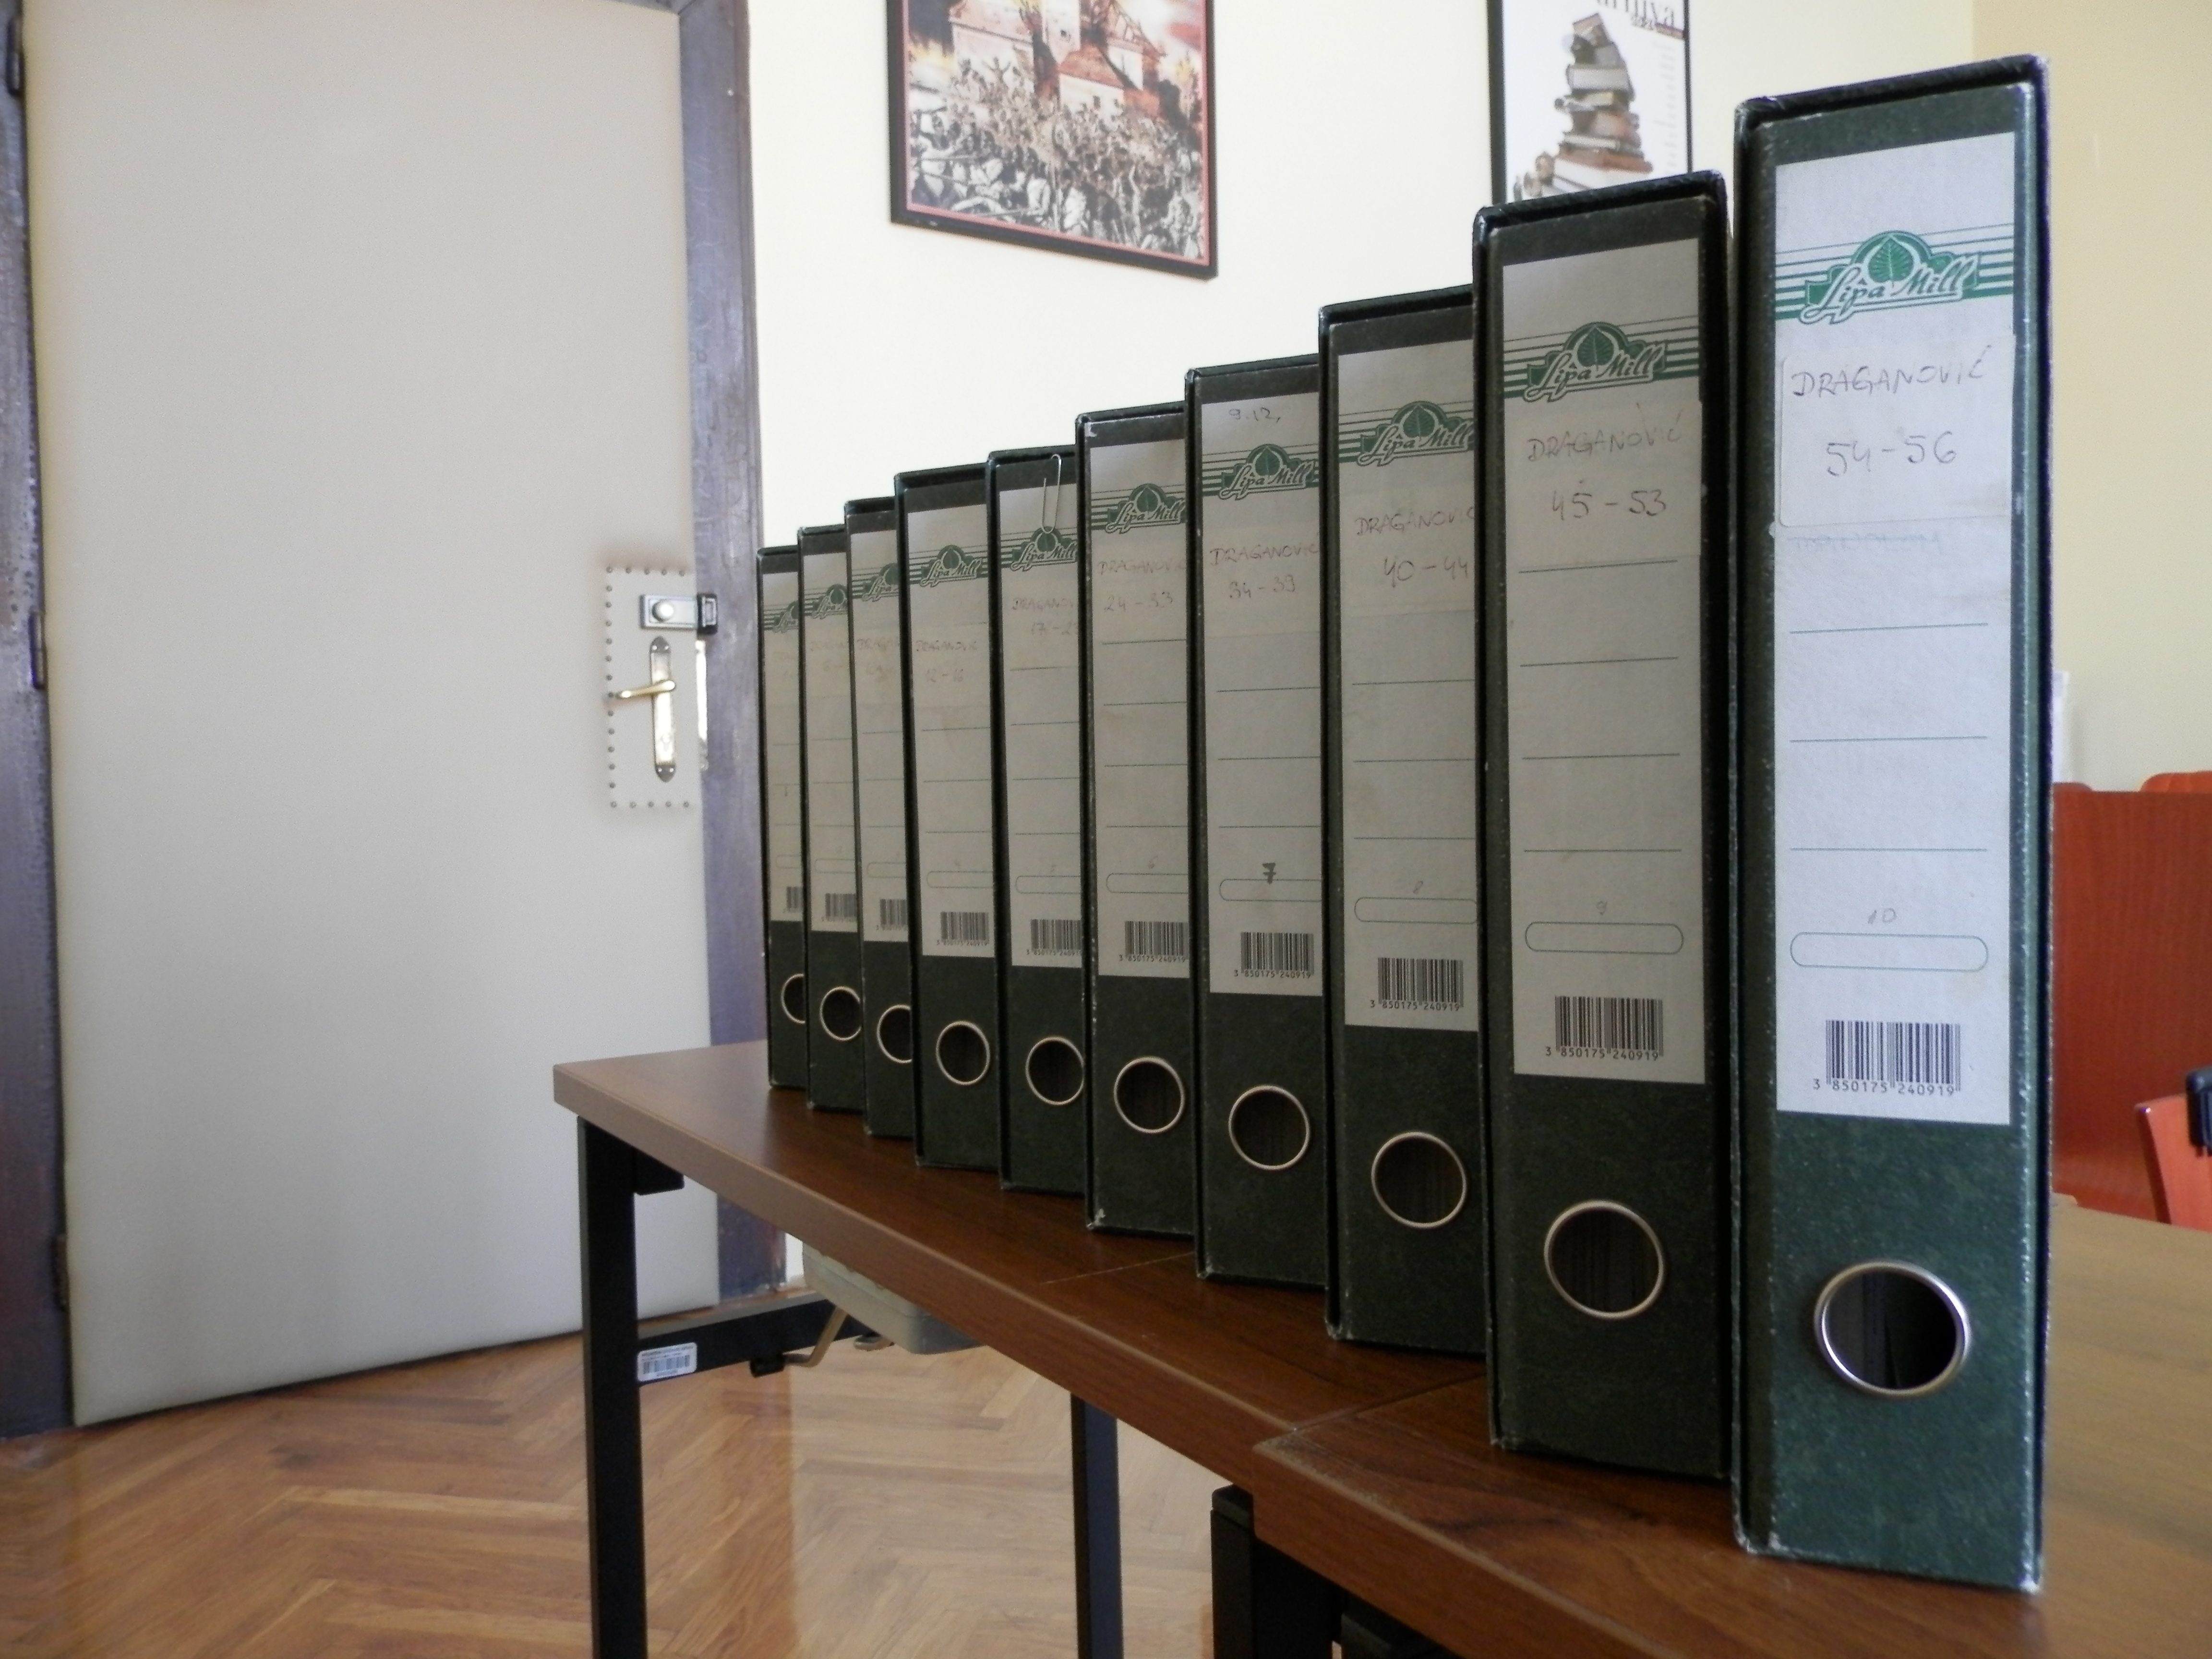 Filing folders of the Krunoslav Draganović's Collection on World War II and Postwar Victims at the Croatian State Archives (2017-01-10).